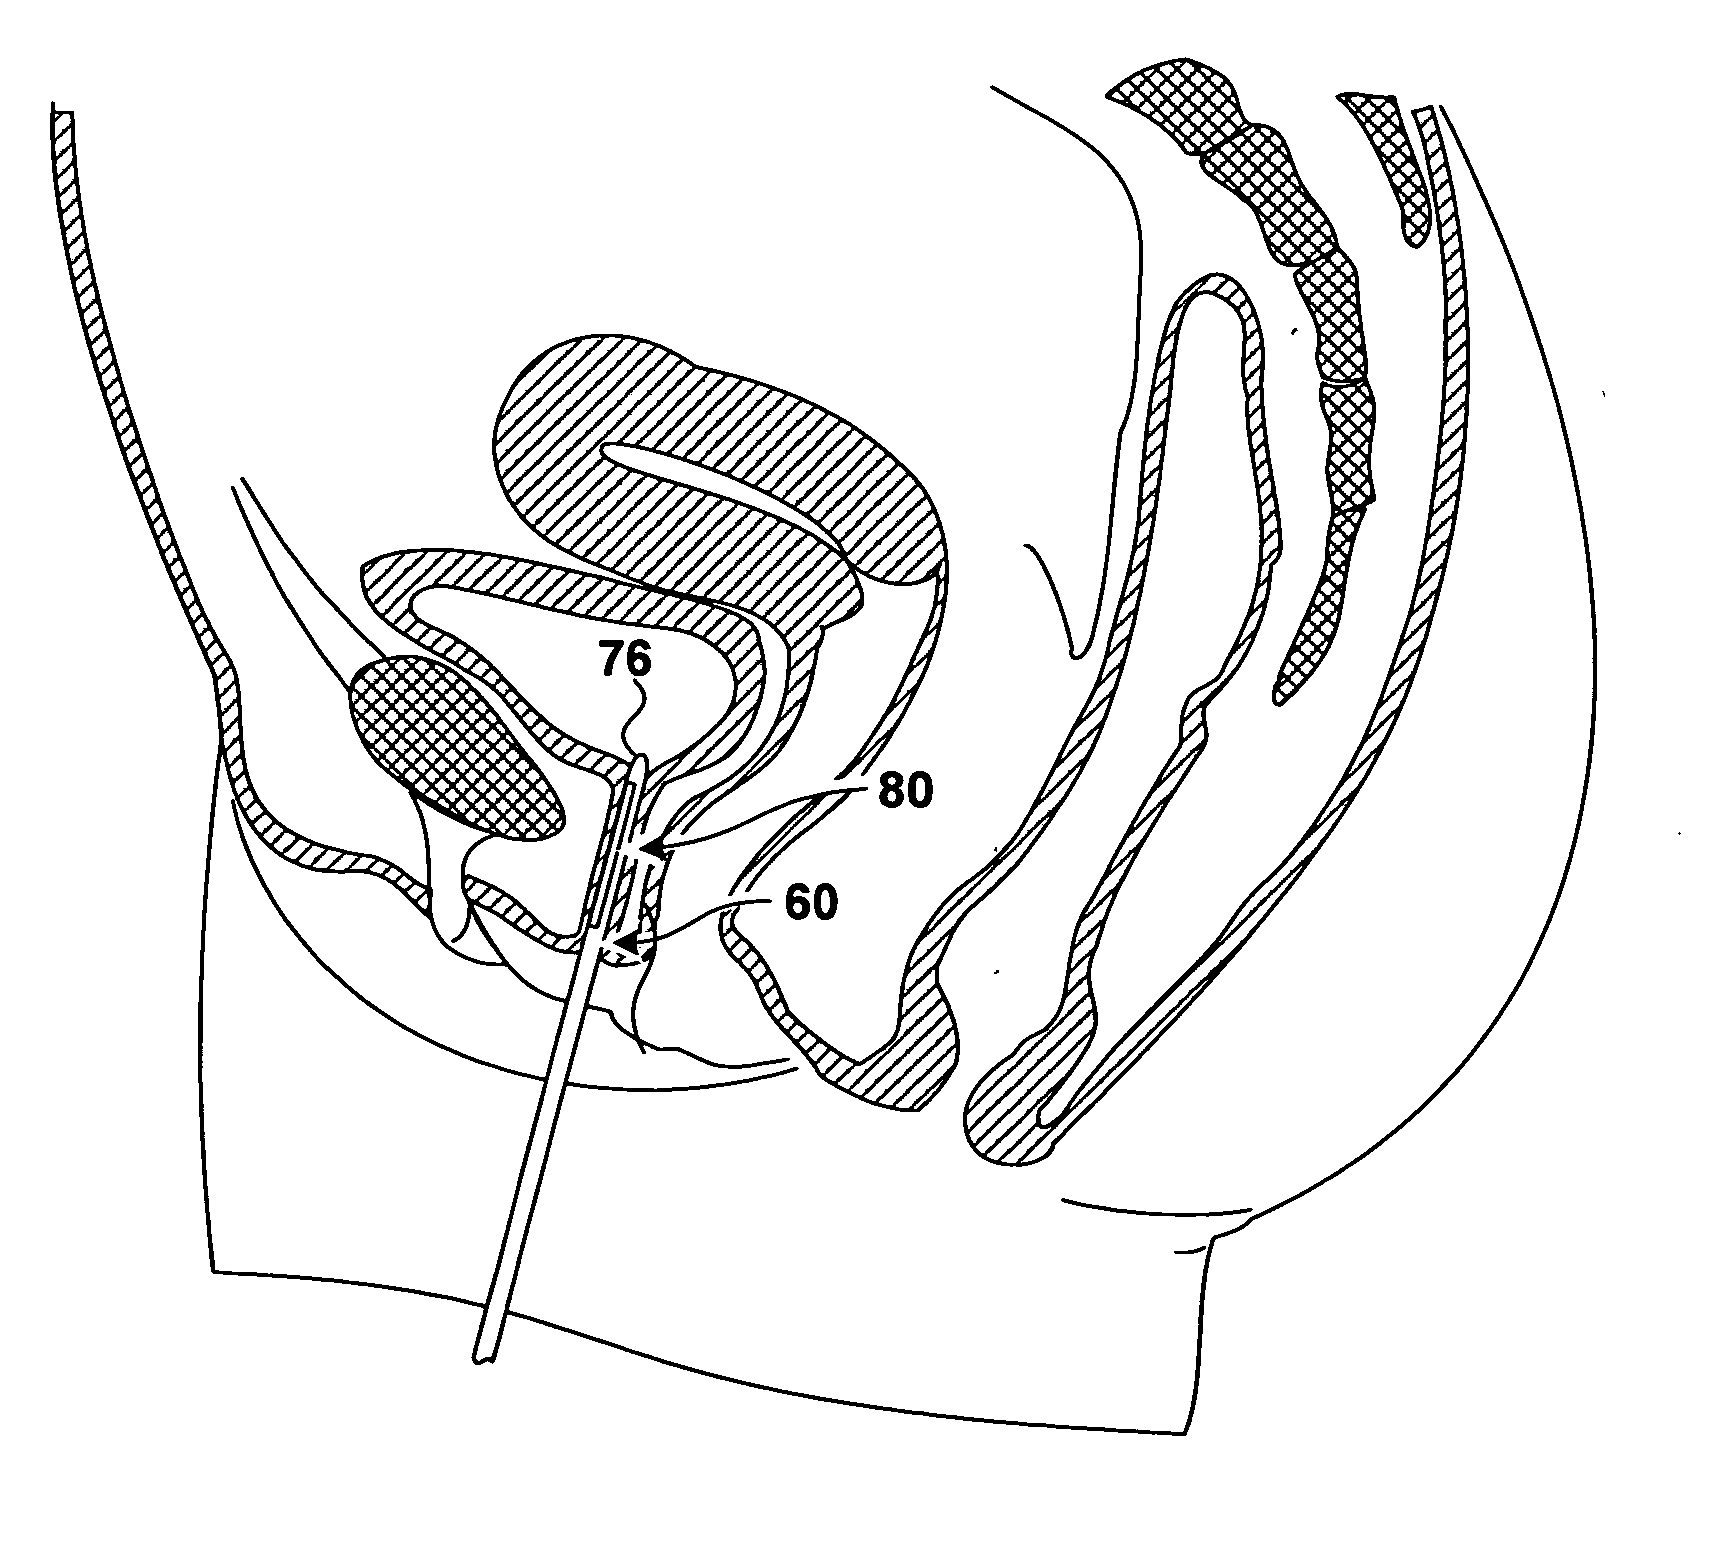 Implantable devices and methods for treating urinary incontinence